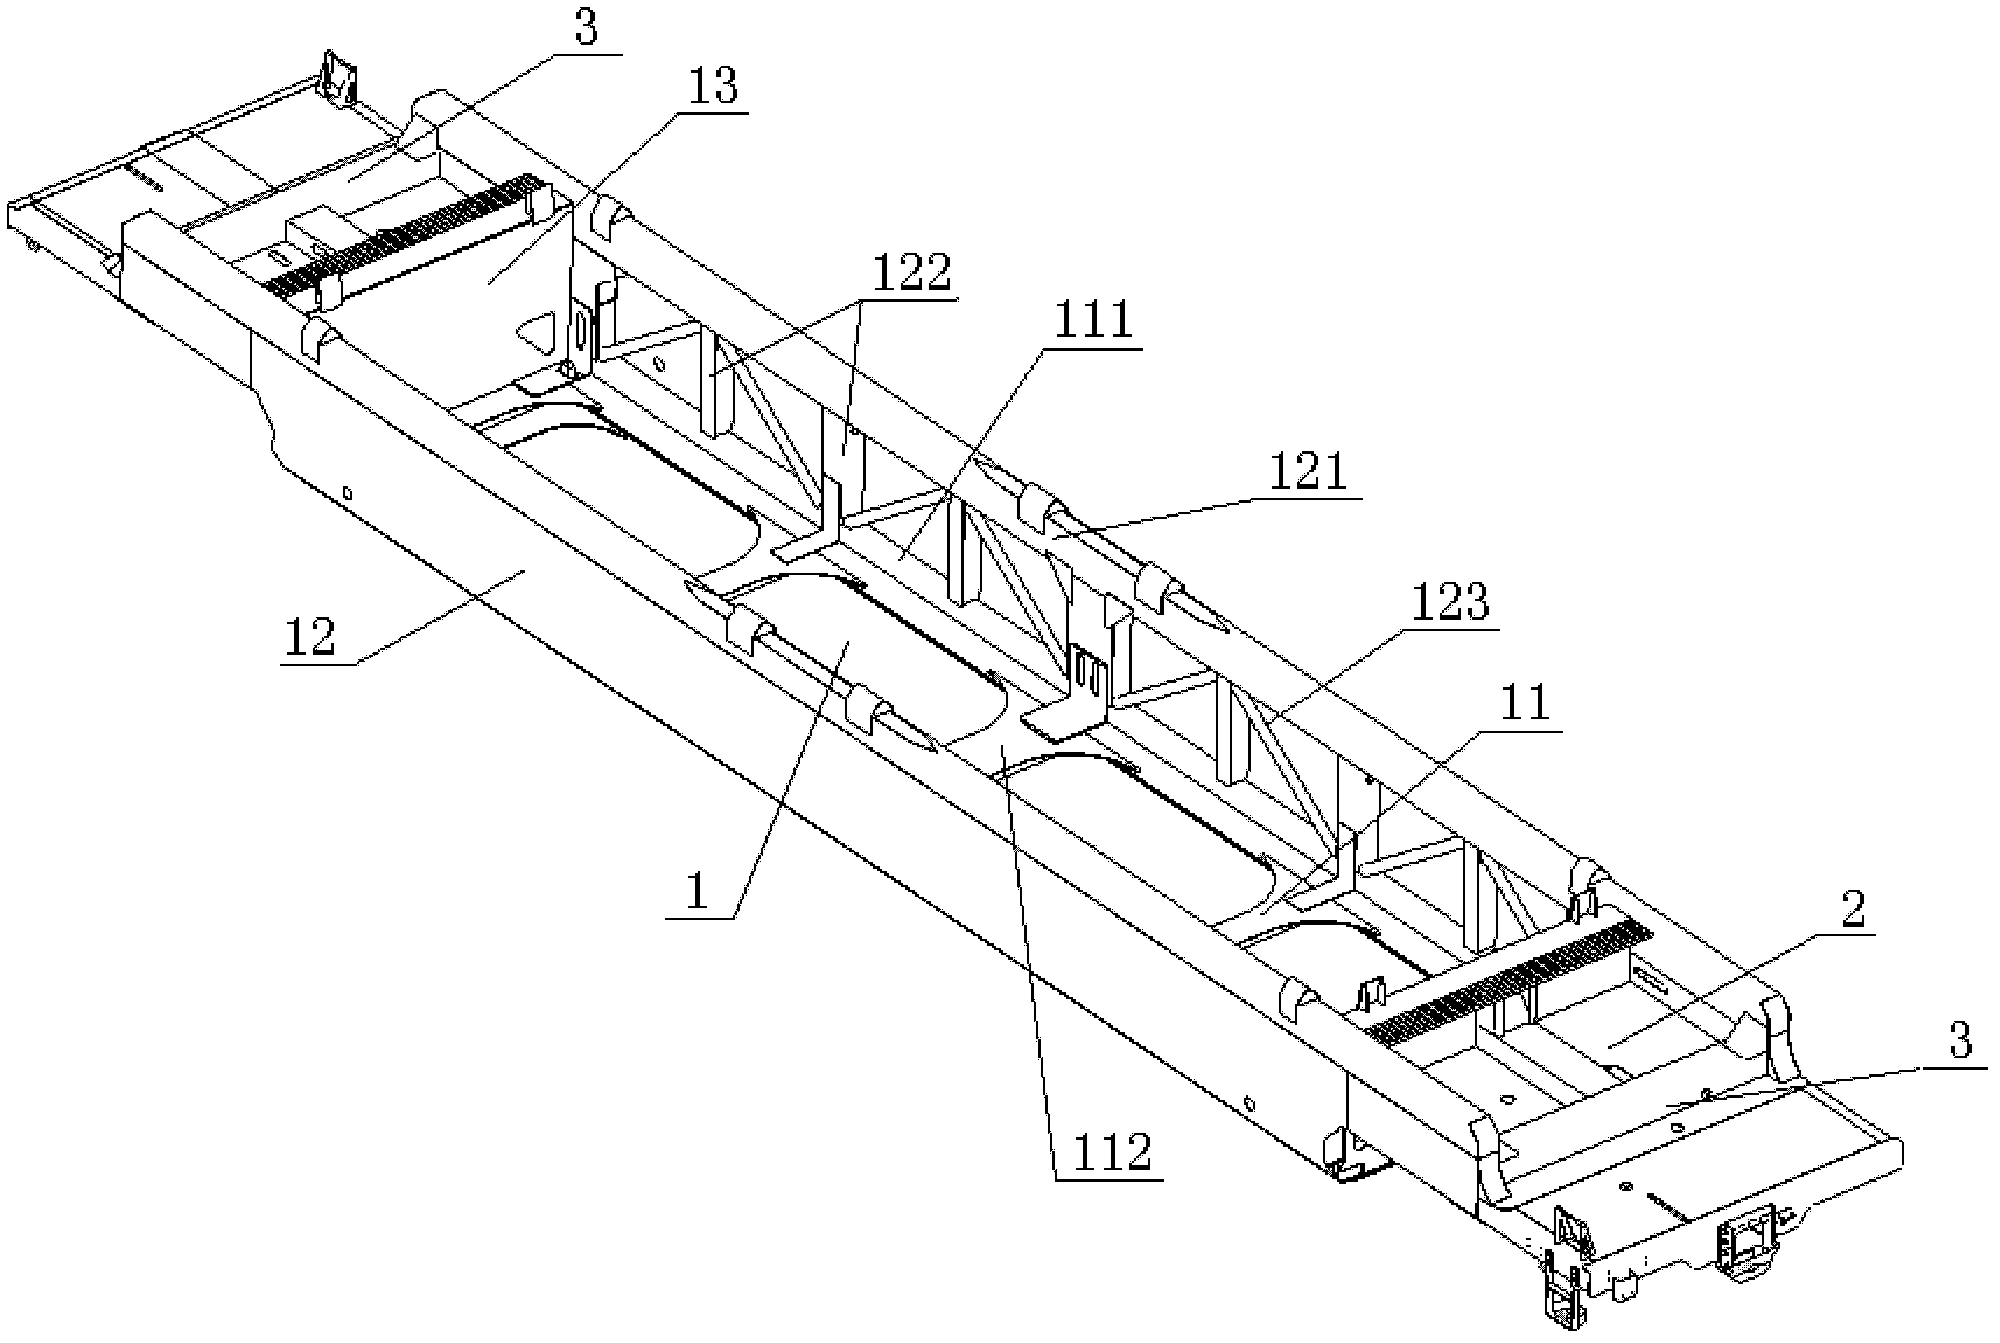 Heavy-load double-layer-loaded container rail wagon